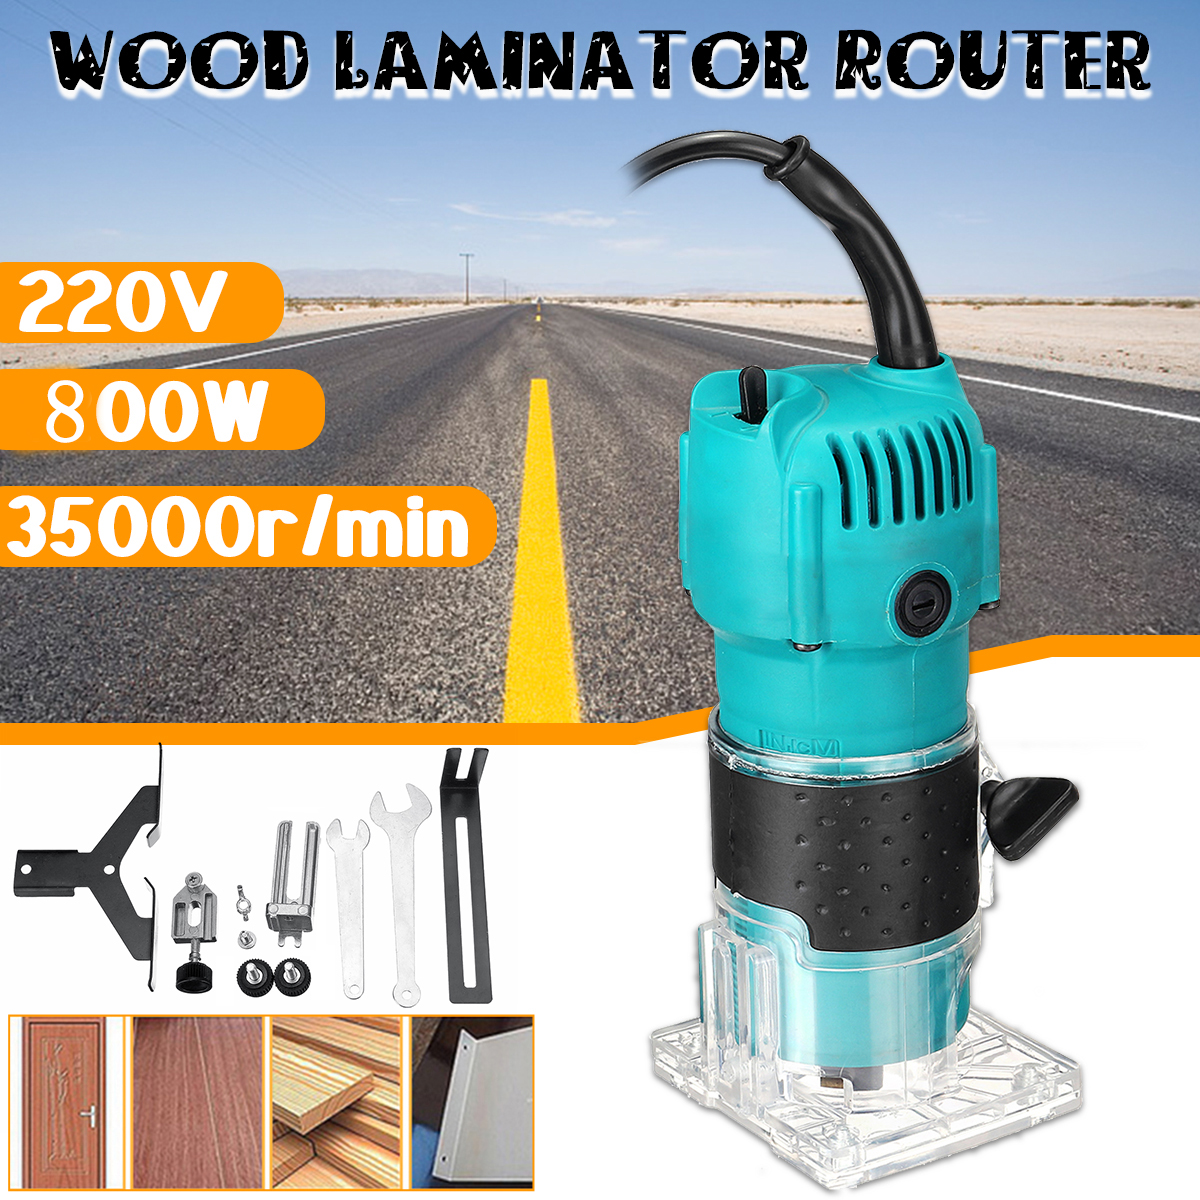 220V-800W-35000rmin-Electric-Hand-Trimmer-Wood-Laminator-Router-Joiners-Tool-1439184-1